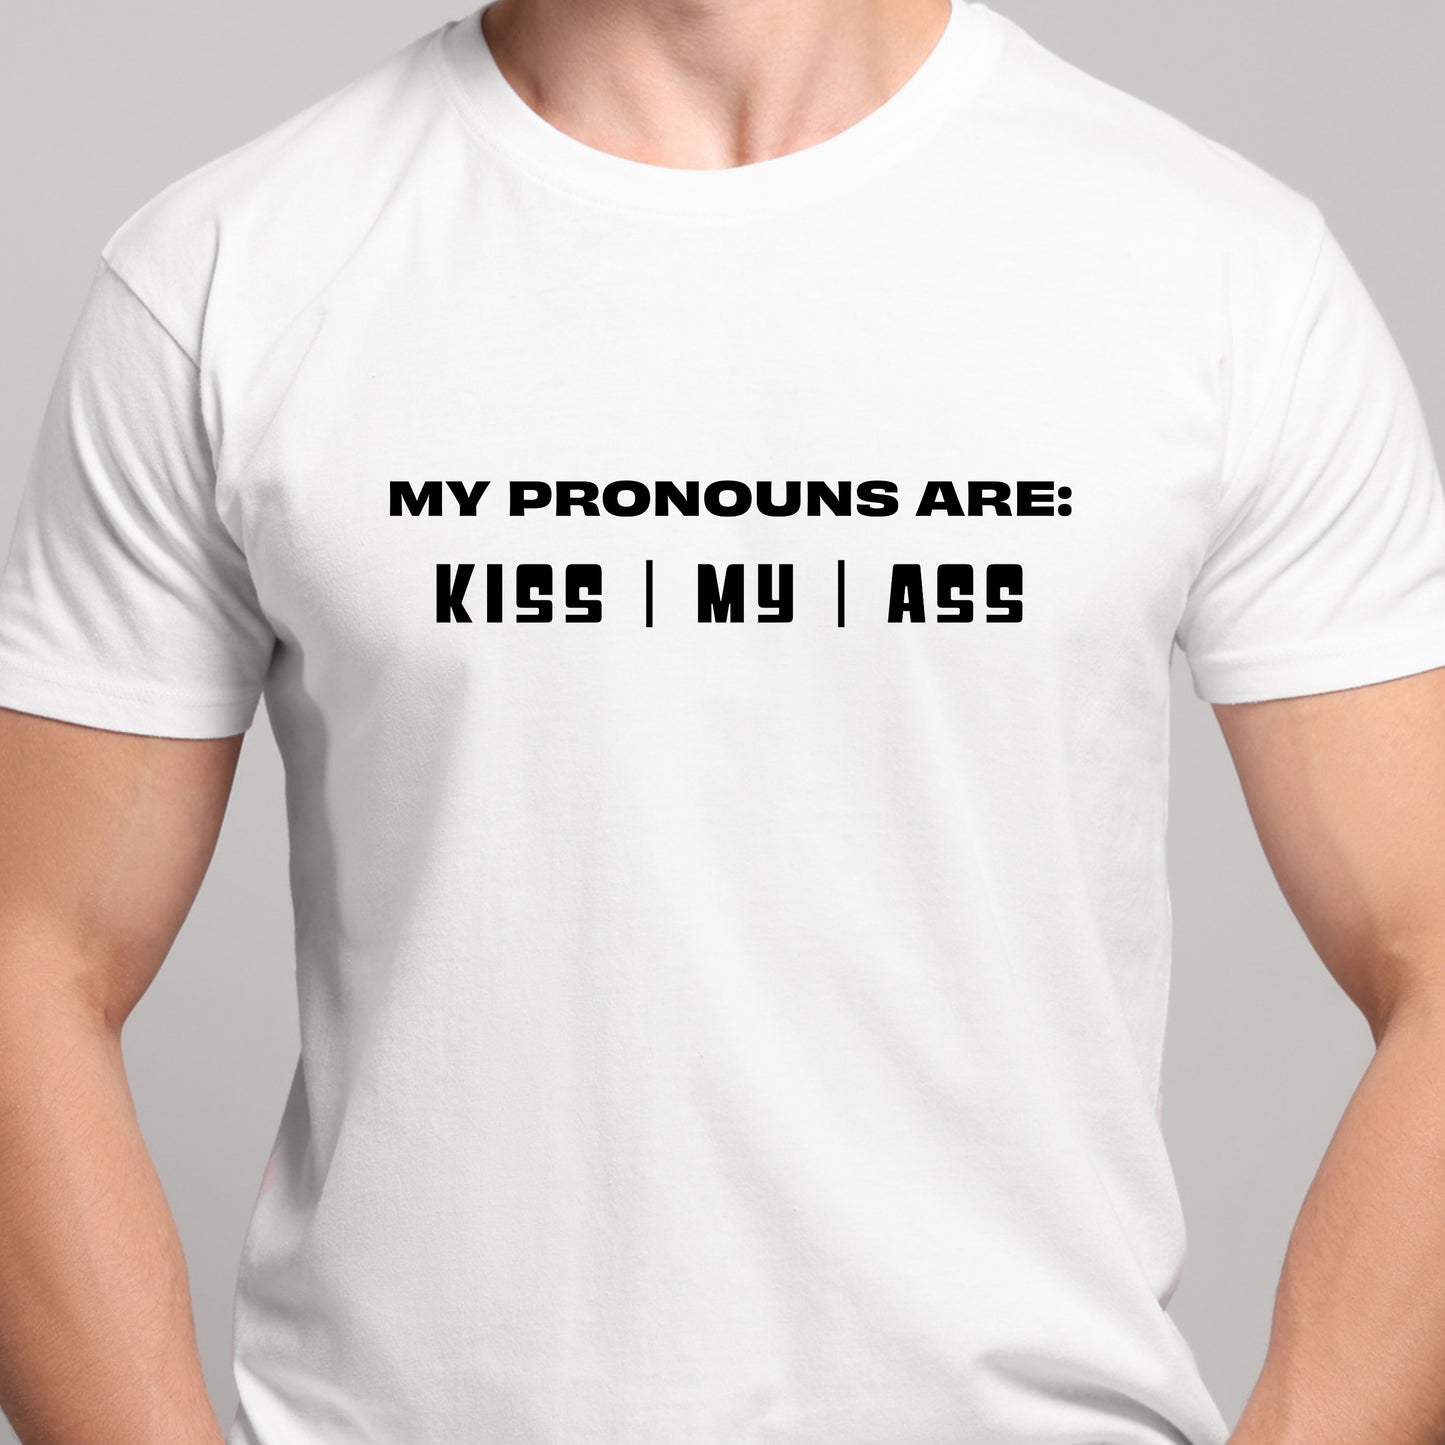 Pronouns T-Shirt For Conservative TShirt For Political Attitude T Shirt For Patriot Shirt With Sarcastic Comment T-Shirt For Funny Pronouns